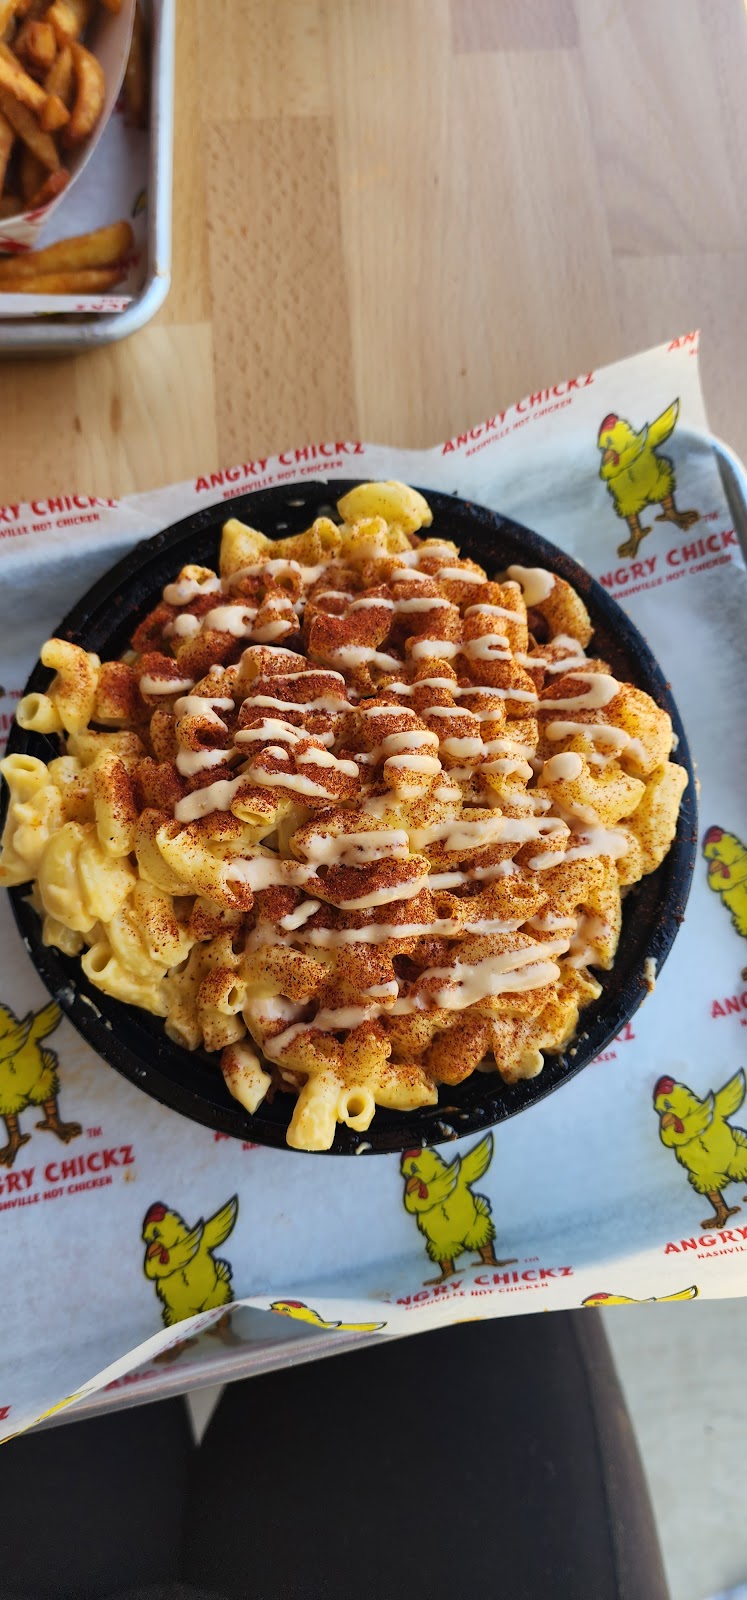 Angry Chickz - Brentwood | 2500 Sand Creek Rd a1, Brentwood, CA 94513 | Phone: (925) 684-7946